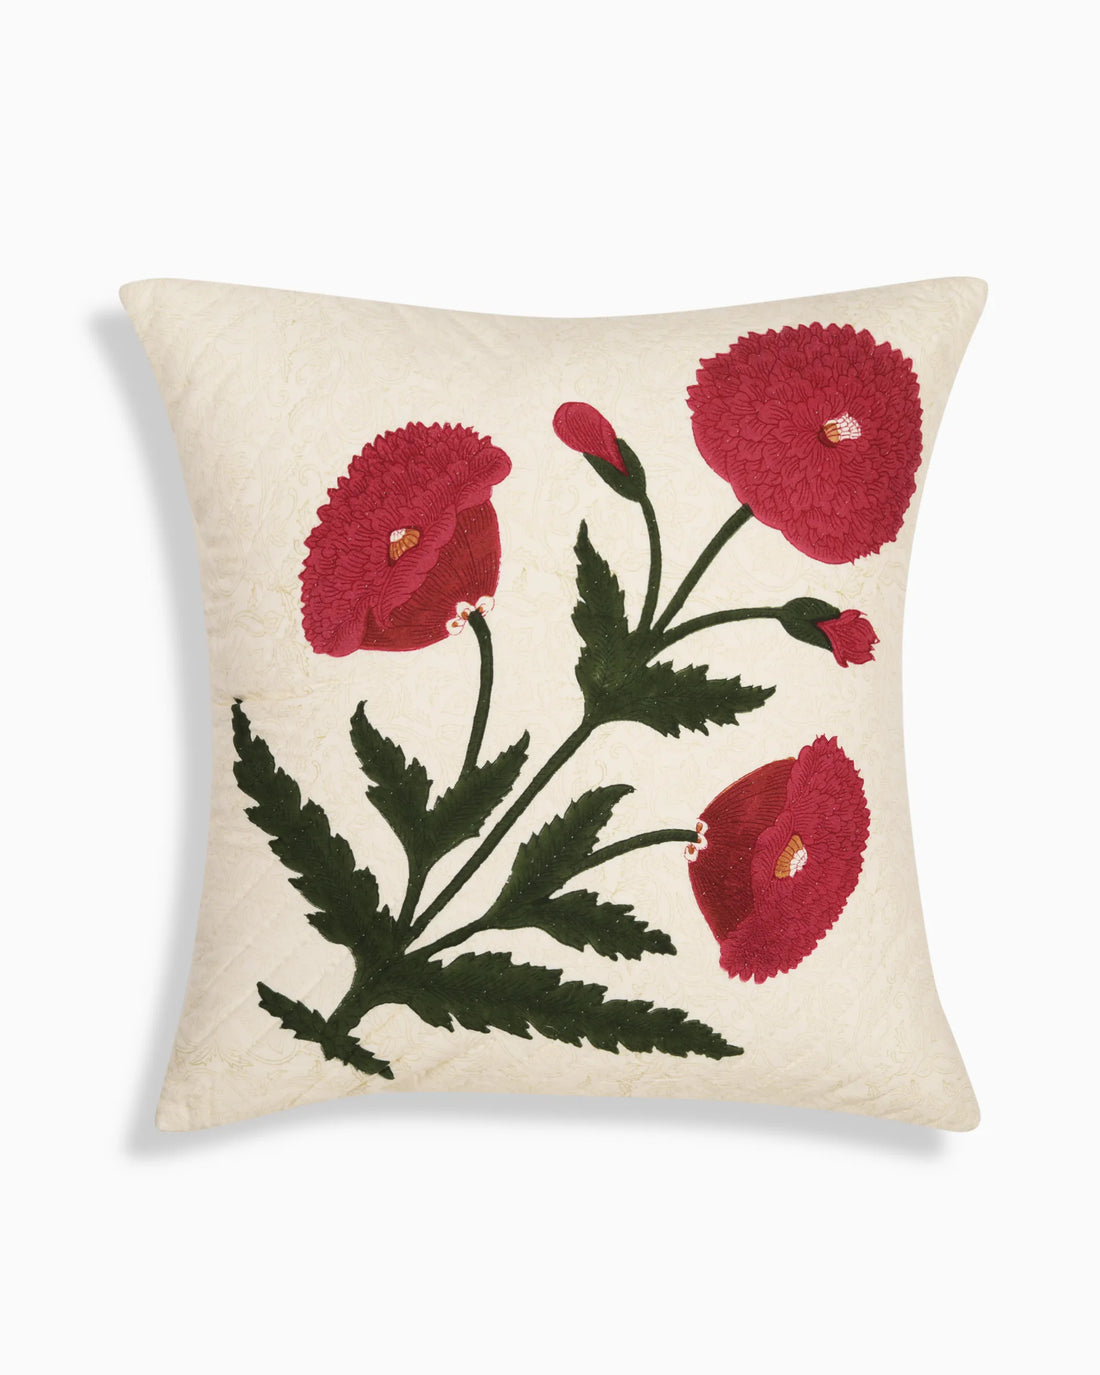 Poppy Quilted Pillow Cover